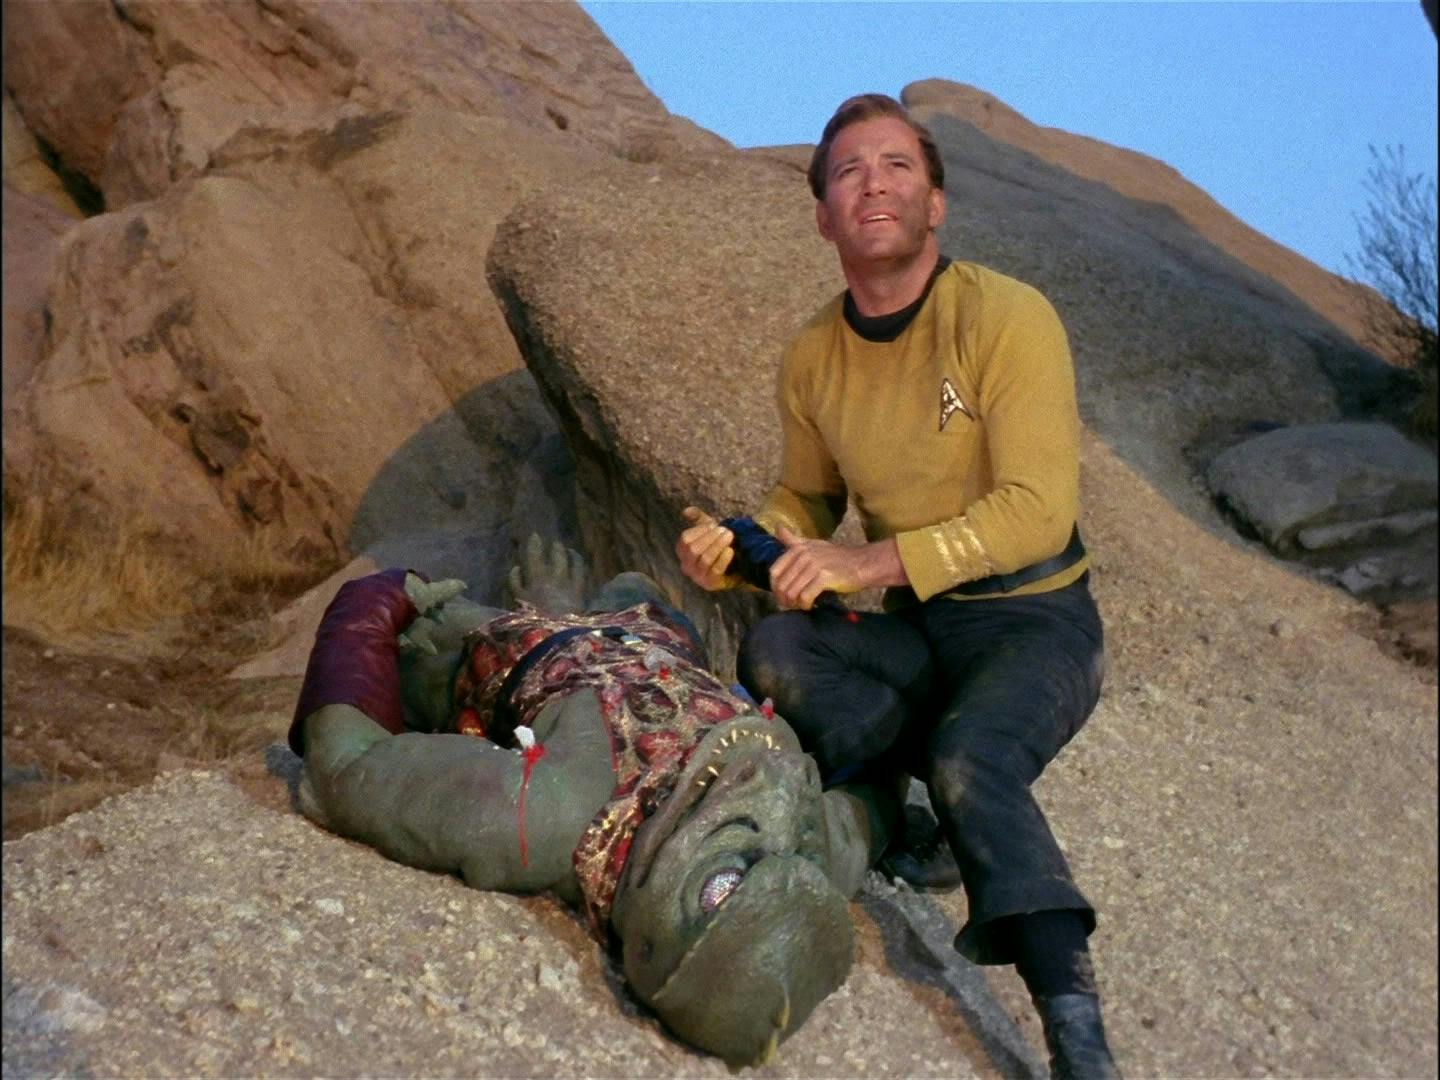 Kirk spares The Gorn in 